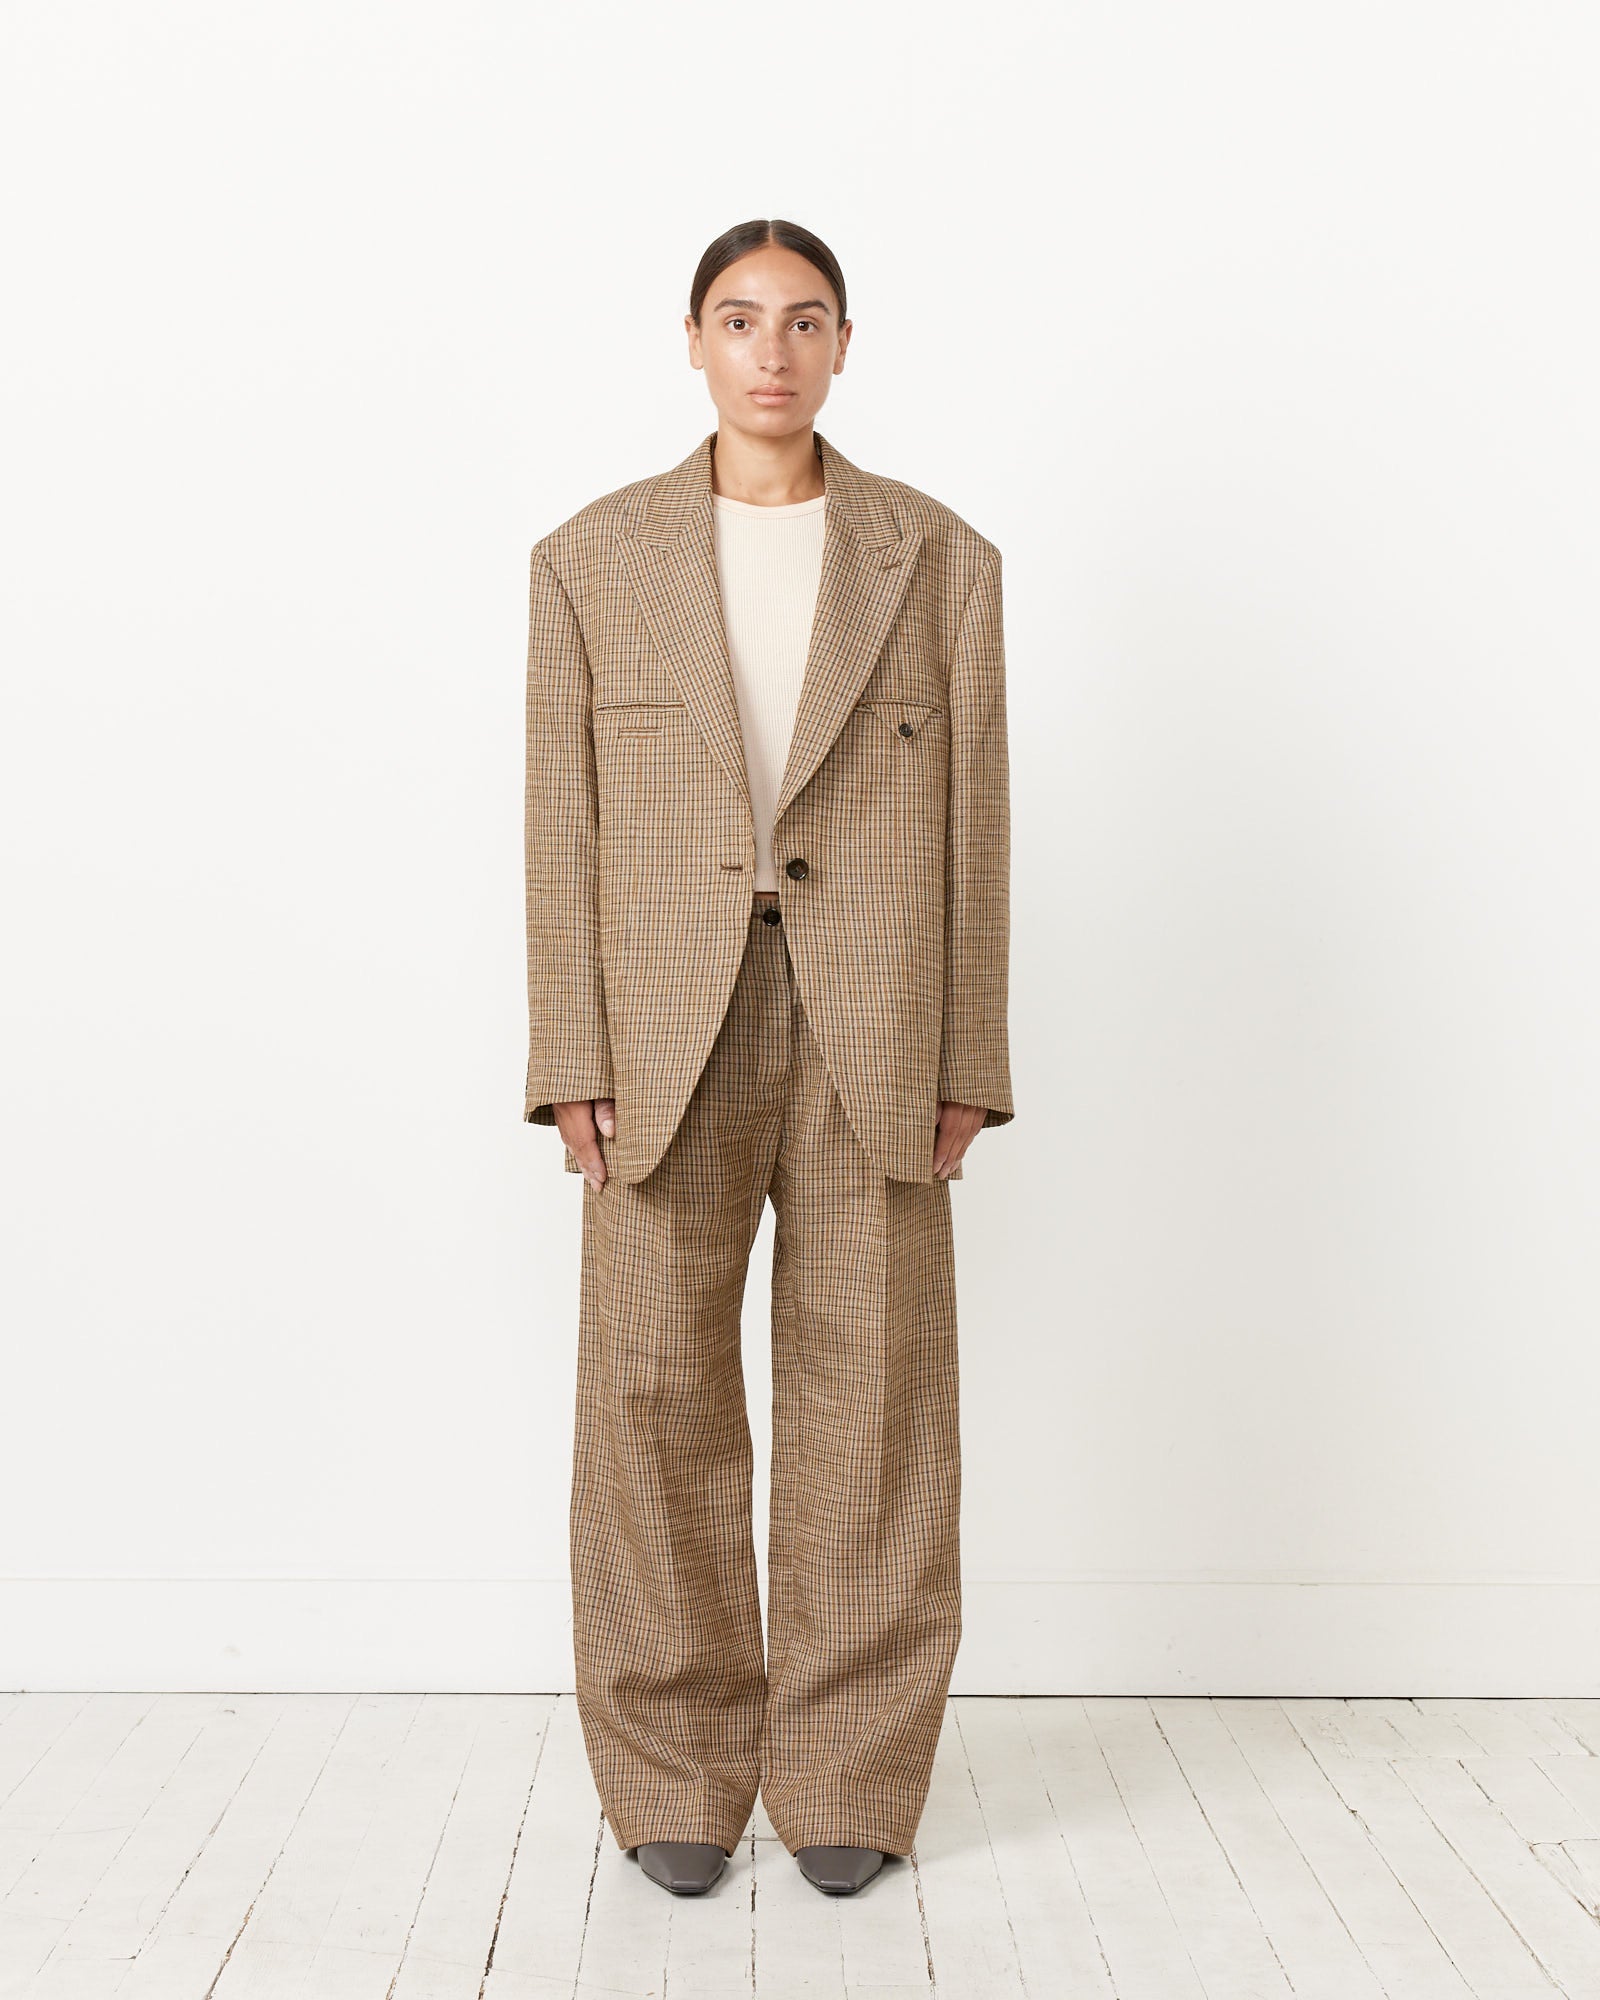 Tailored Linen Blend Trousers in Multi Brown